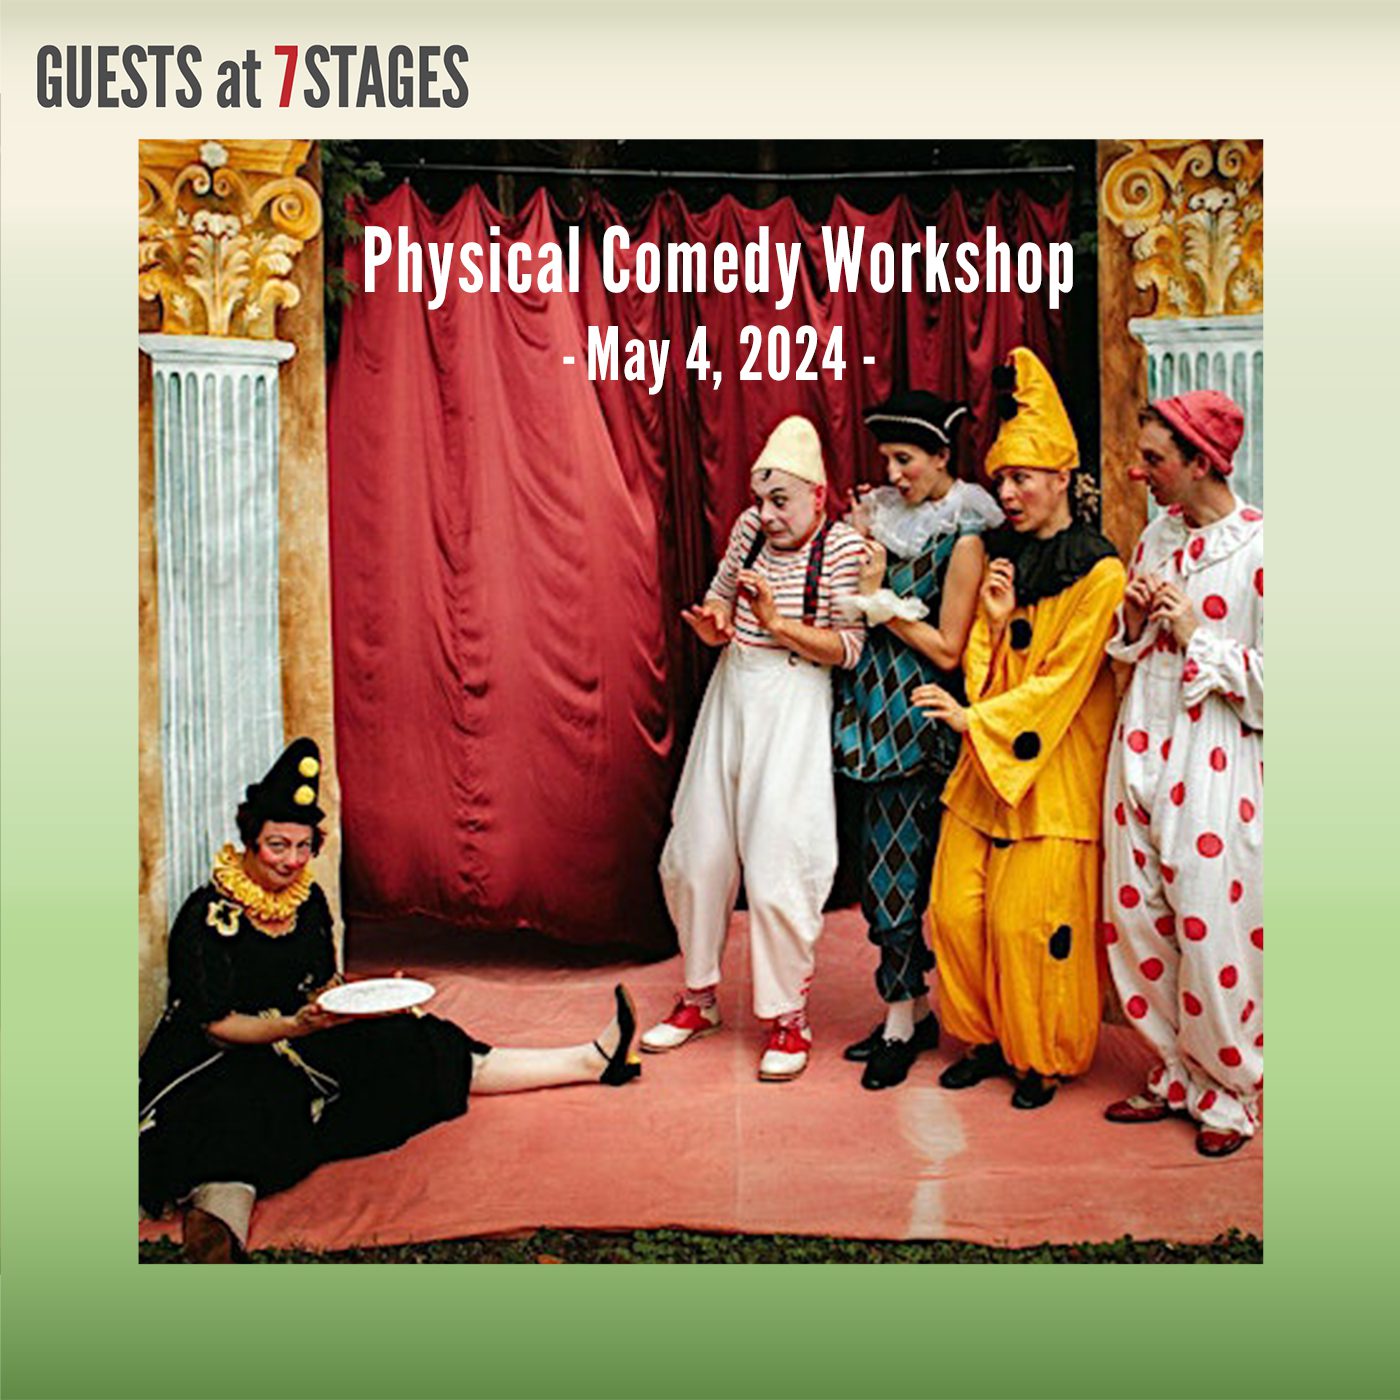 Guests at 7 Stages. Physical Comedy Worshop. May 4, 2024.